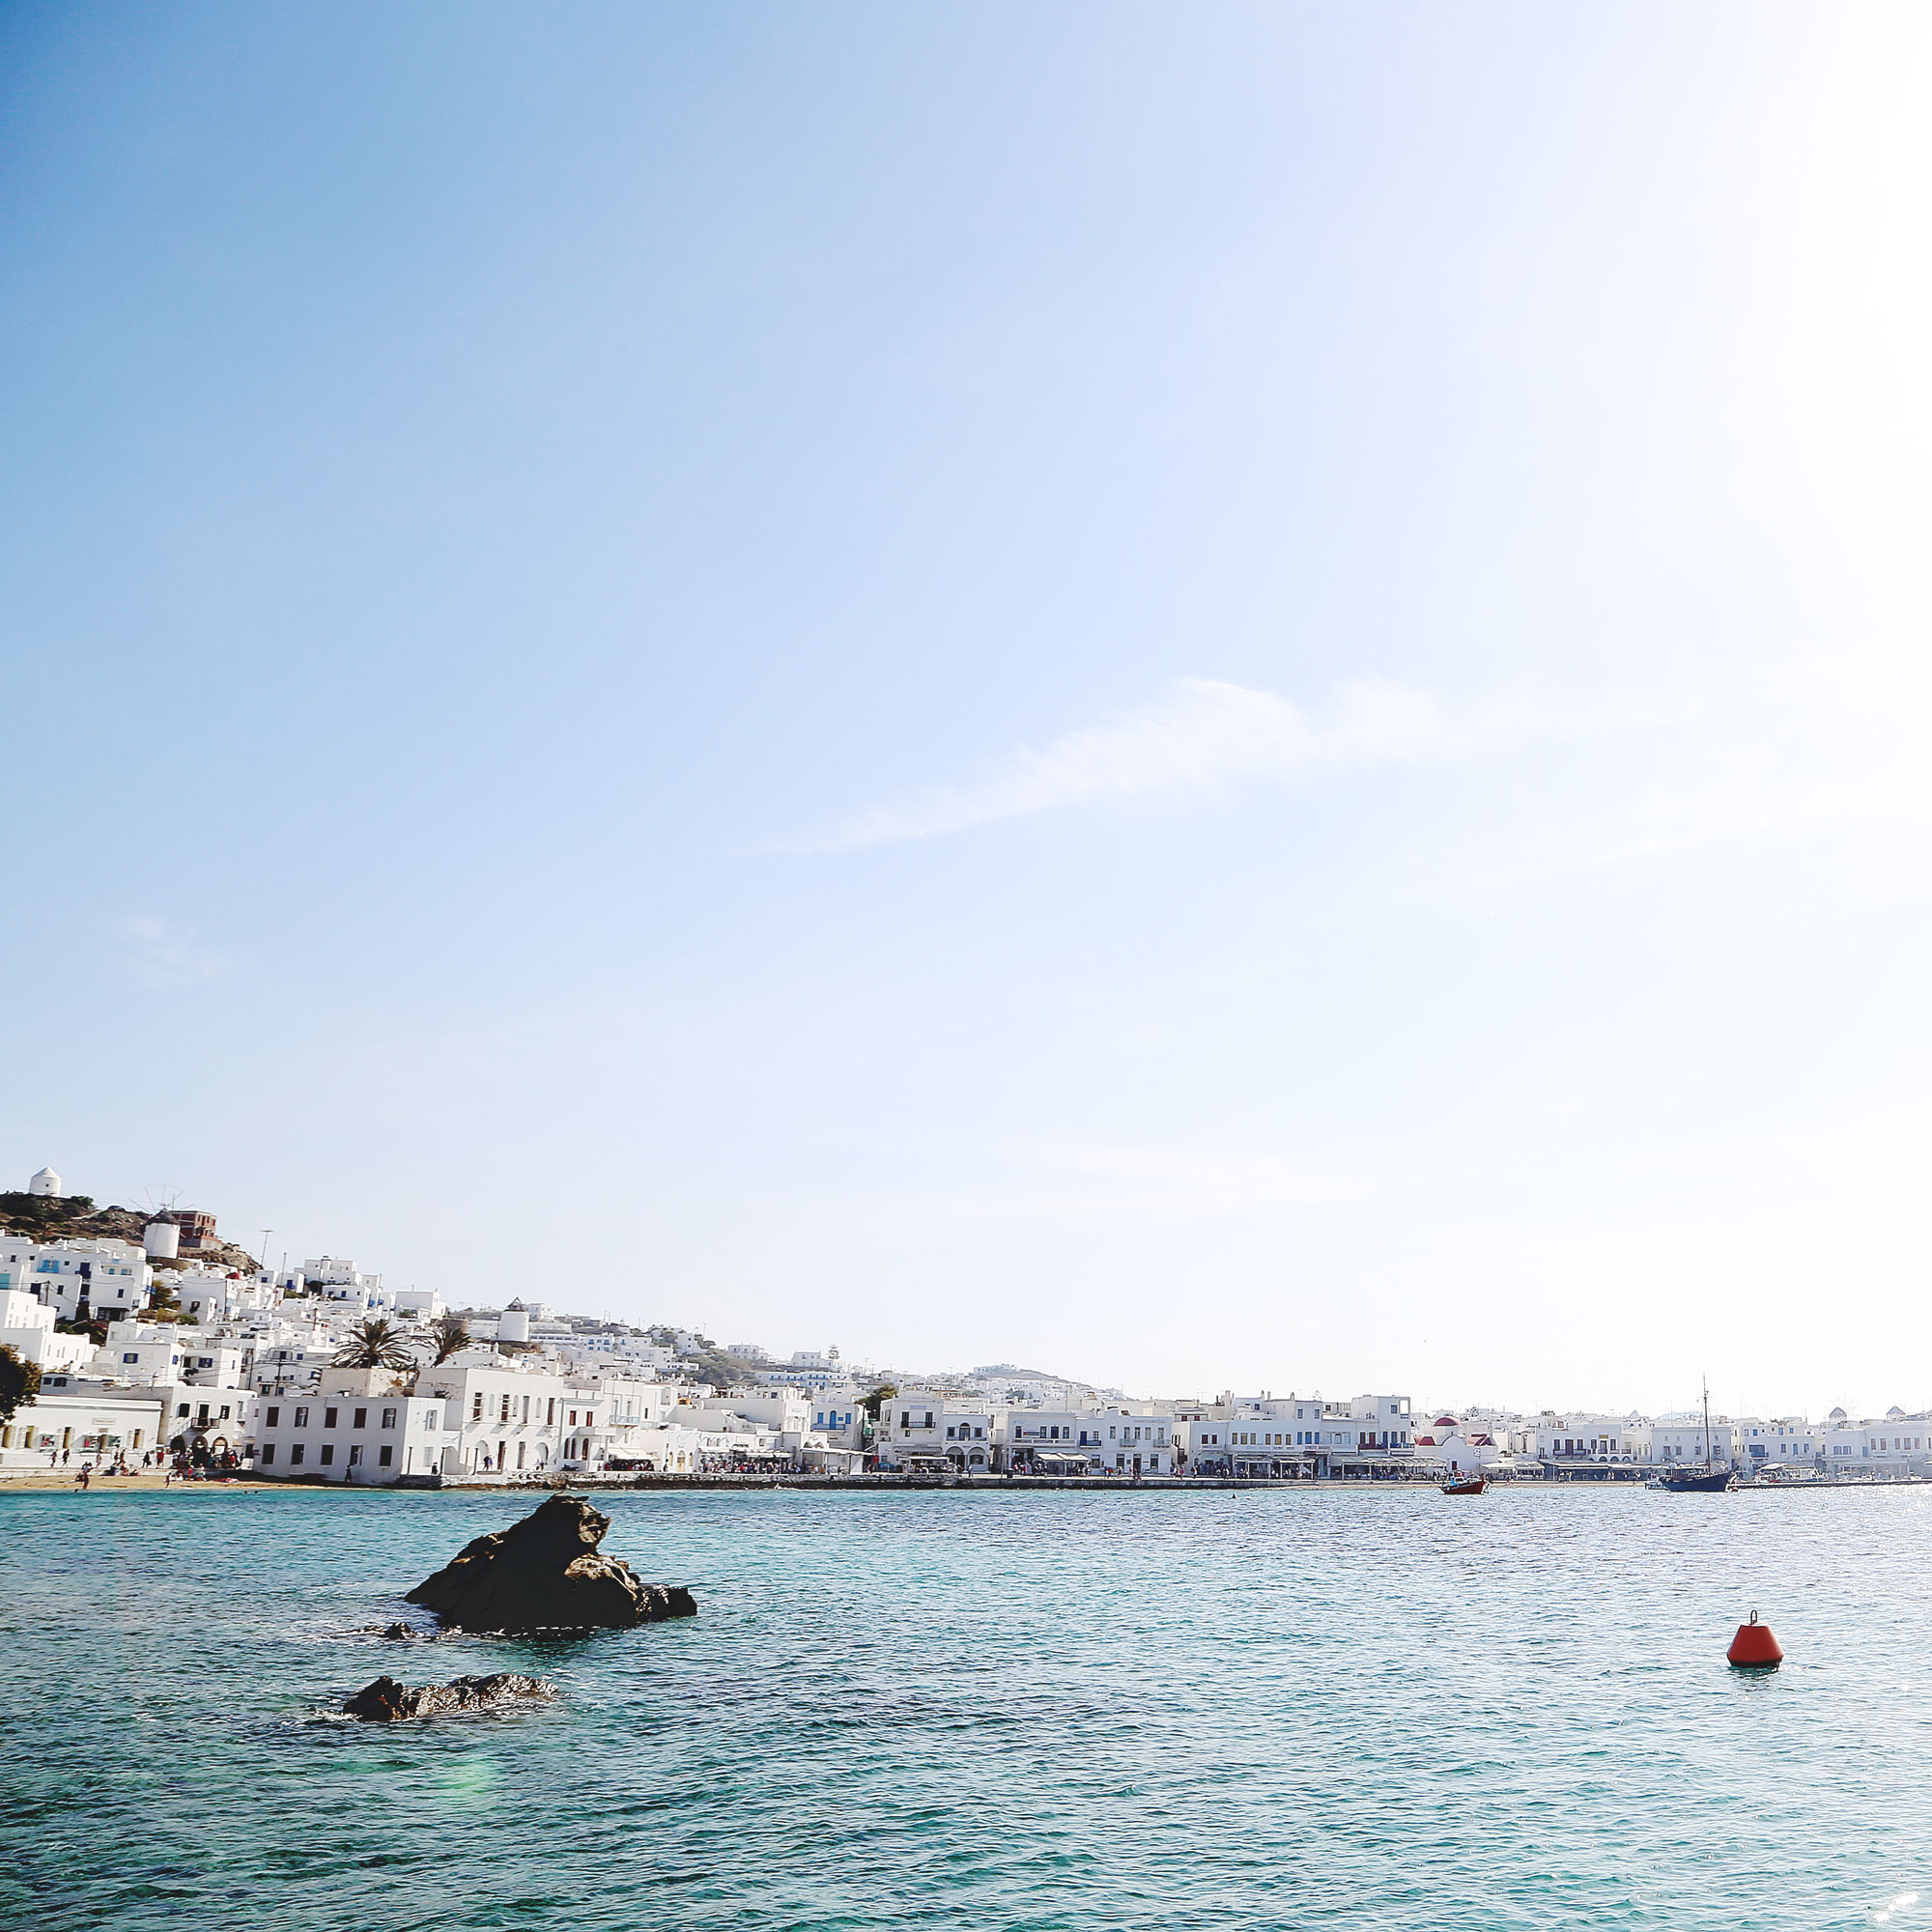 Mykonos Travel Guide - what to see and do in Mykonos, Greece